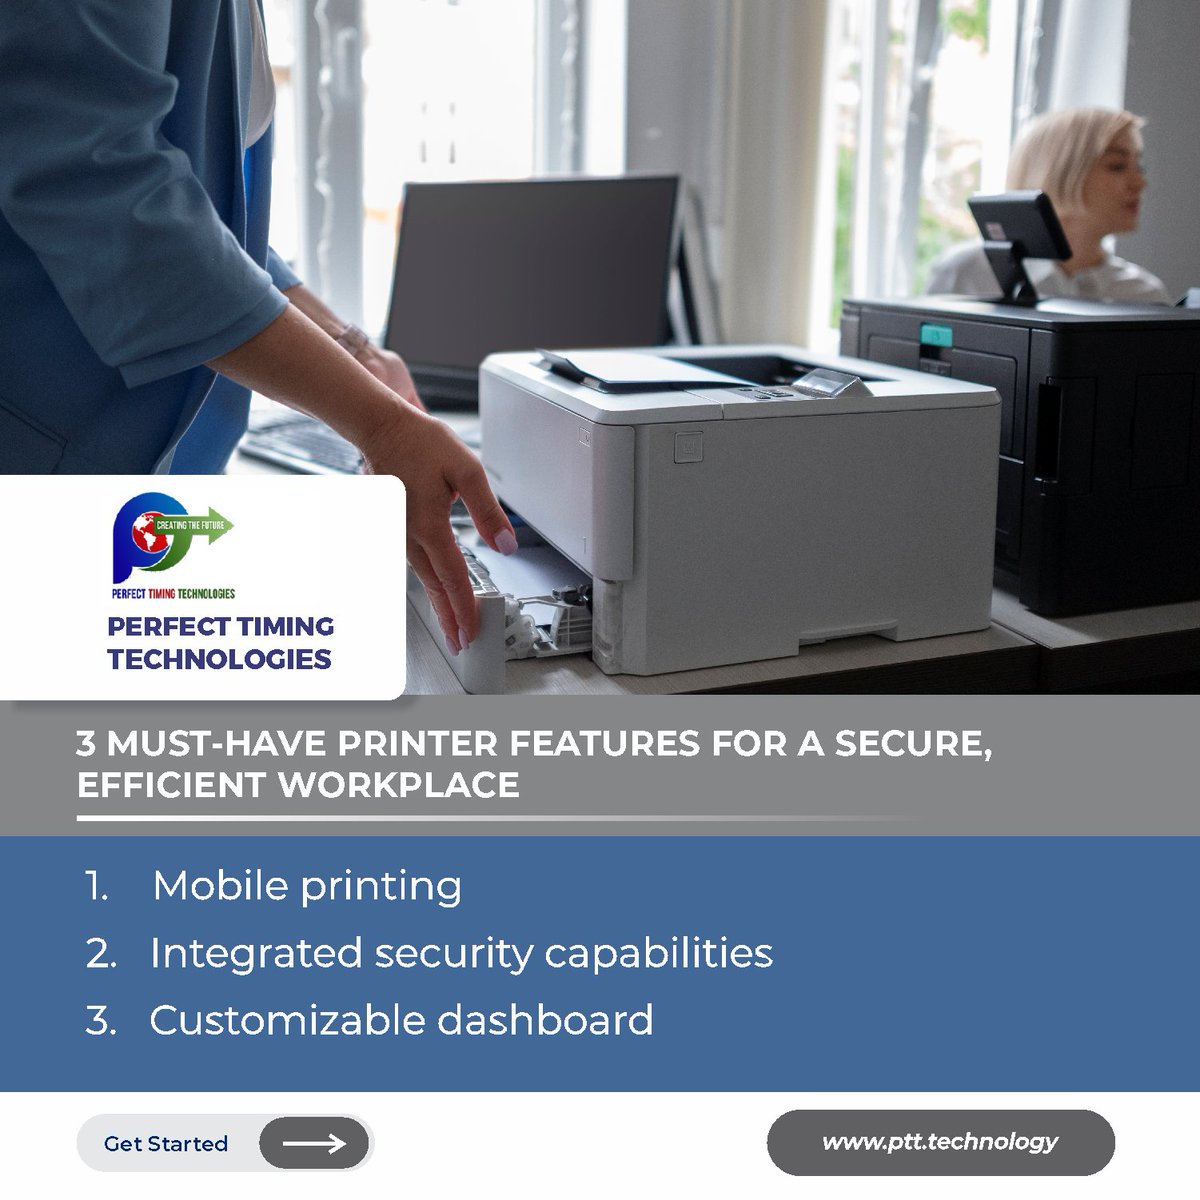 3 Must-Have Printer Features for a Secure, Efficient Workplace

Read here: blog.symquest.com/must-have-prin…

#PrinterSecurity #EfficientWorkplace #PrintTechnology #SymquestBlog #TechInnovation #PrintSolutions #SecurePrinting #TechBlog  #PerfectTimingTechnology #PerfectTimingHolding